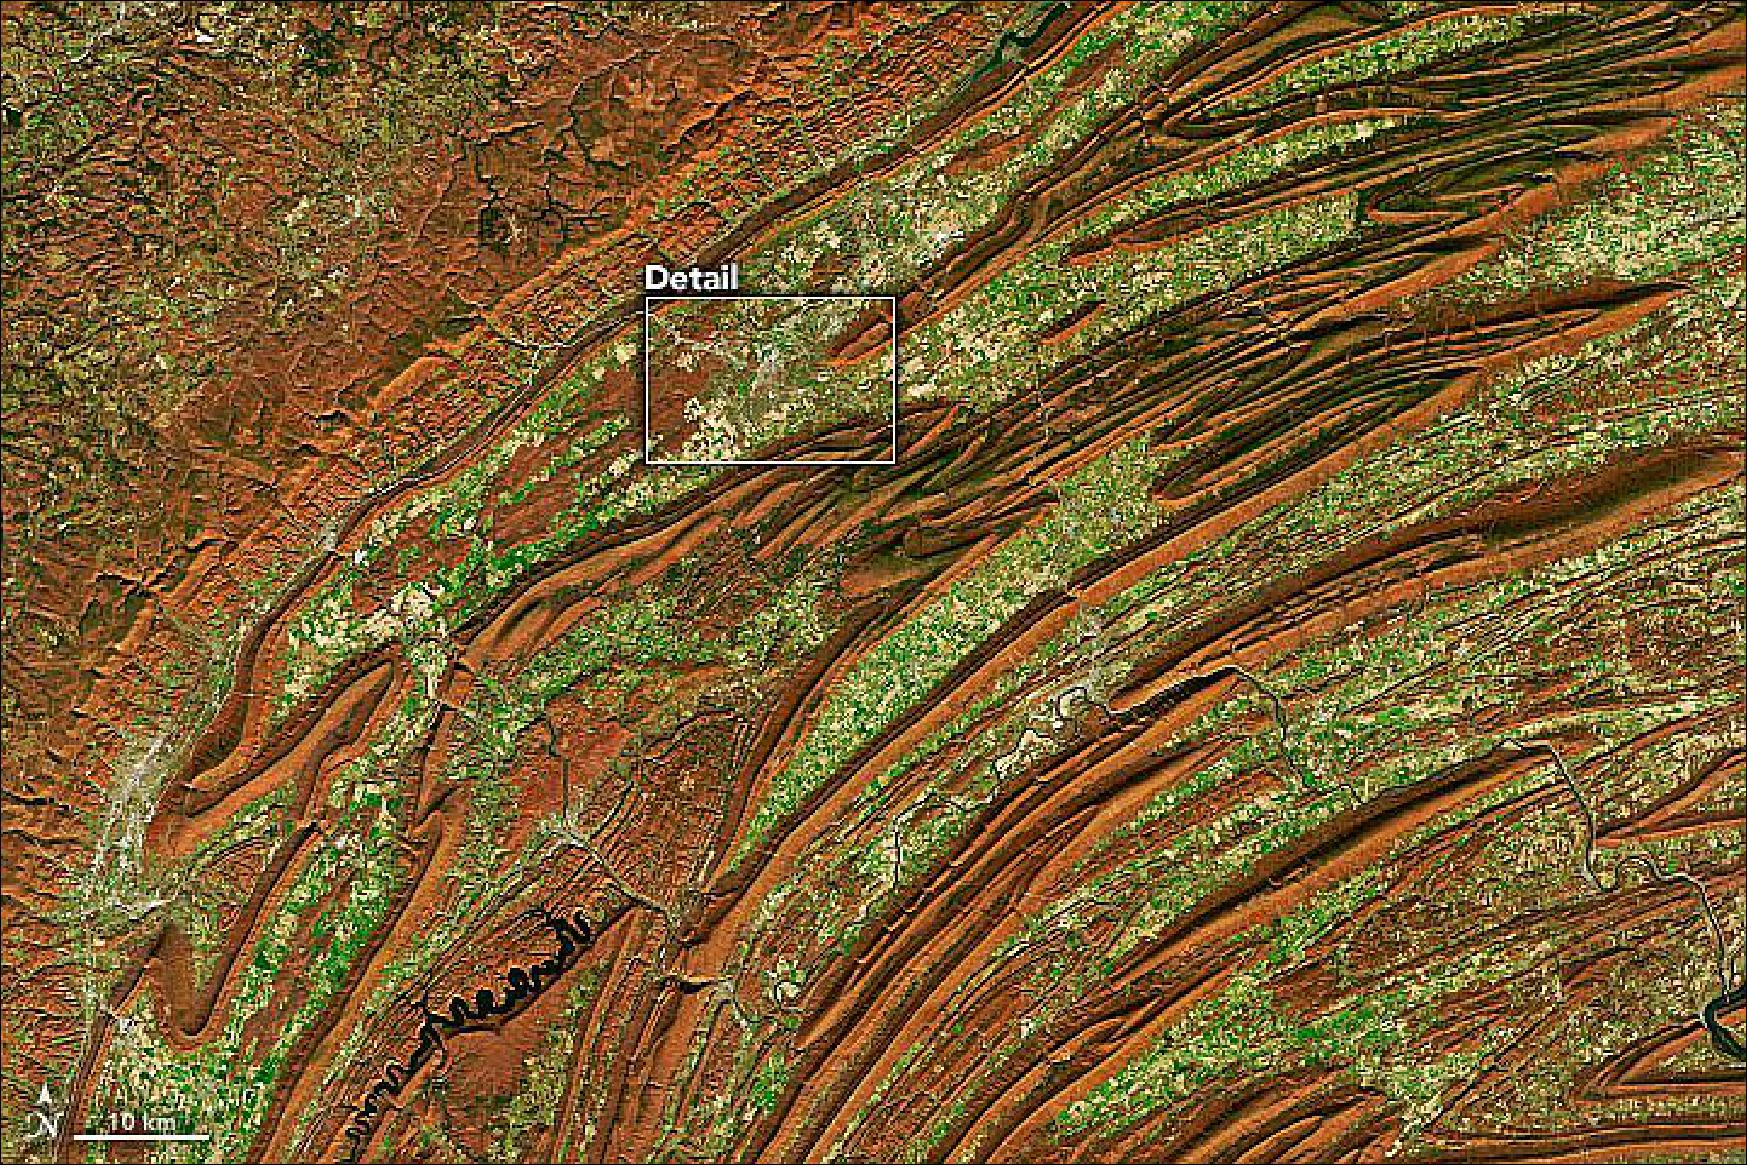 Figure 12: The folded mountains of central Pennsylvania were past peak leaf-peeping but still colorful when the Operational Land Imager (OLI) on the Landsat-8 satellite passed over on November 9, 2020. The natural-color images above show the hilly region around State College, Pennsylvania (image credit: NASA Earth Observatory images by Joshua Stevens, using Landsat data from the U.S. Geological Survey and data from NASA/METI/AIST/Japan Space Systems, and the U.S./Japan ASTER Science Team. Story by Joshua Stevens and Michael Carlowicz)